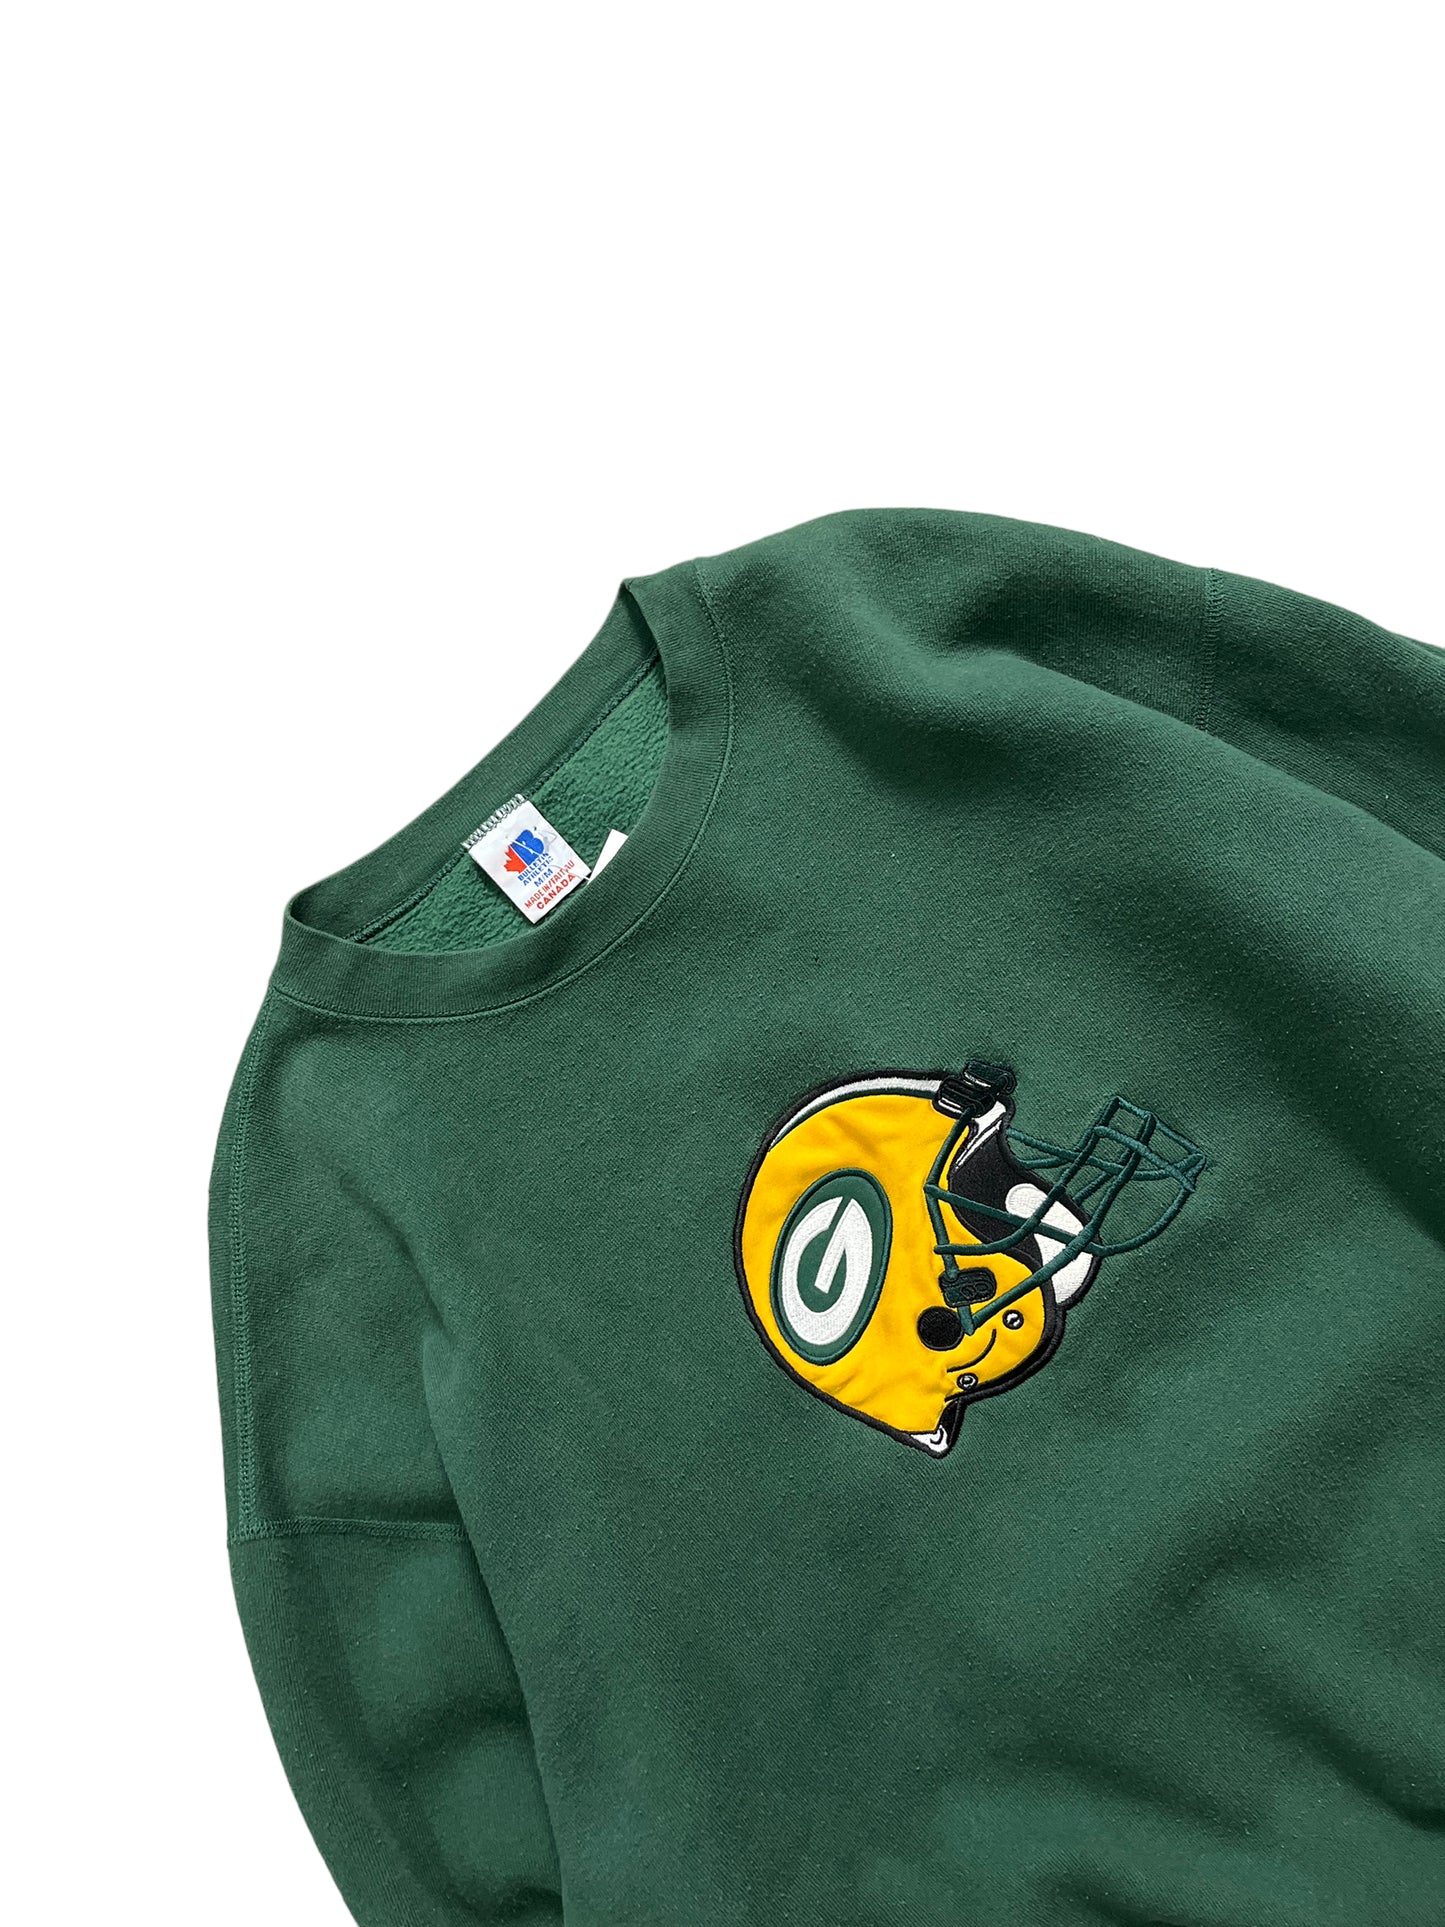 Vintage Green Bay Packers Sweater